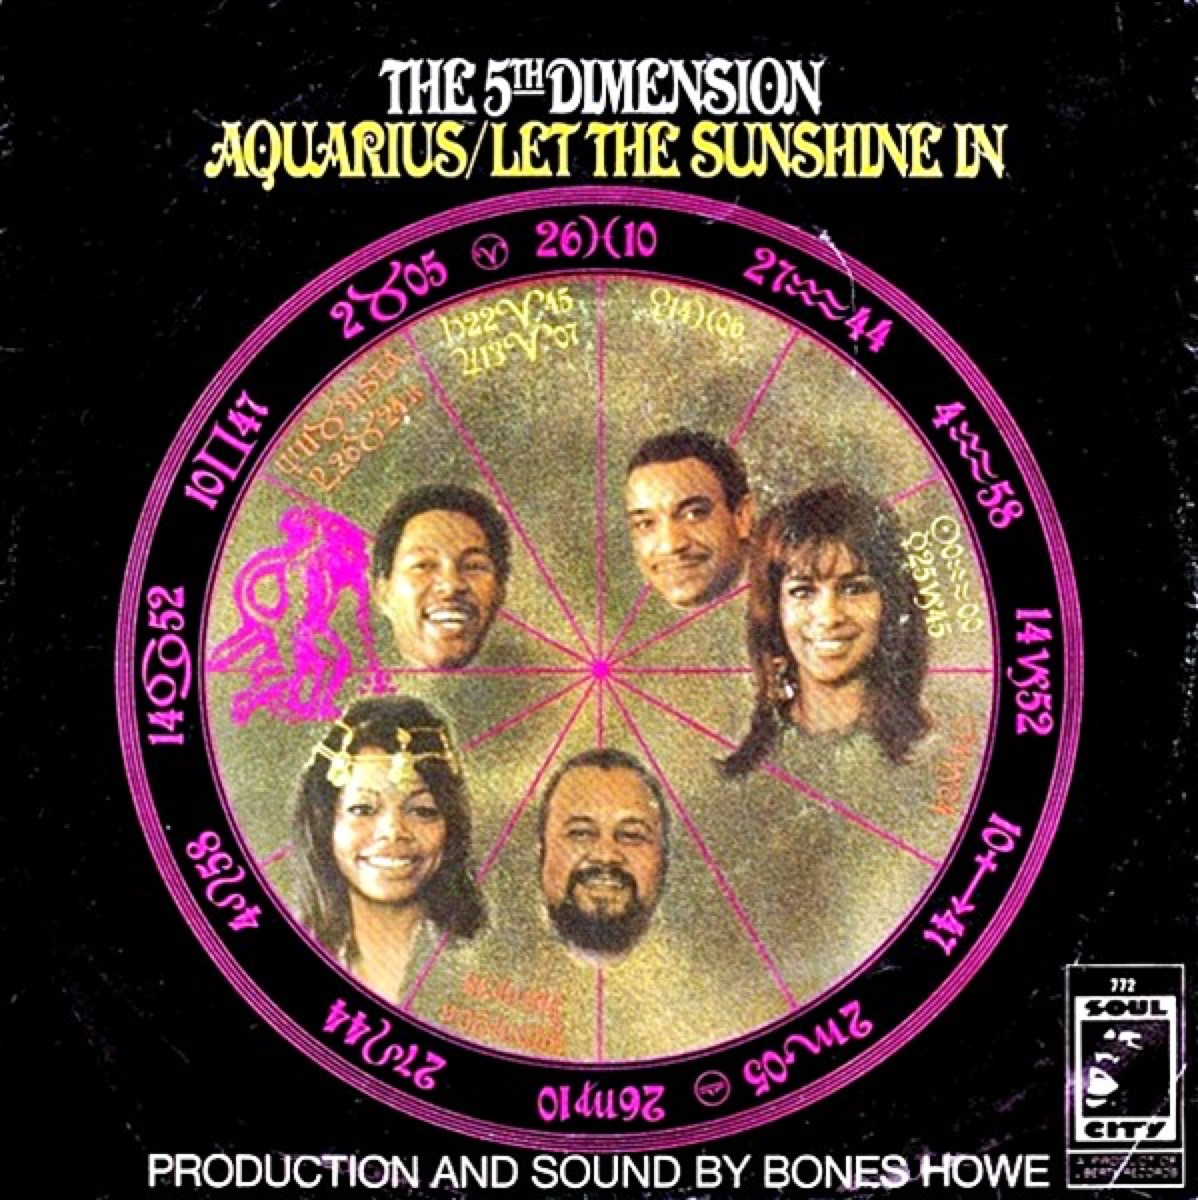 fifth dimension single cover for aquarius/let the sunshine in